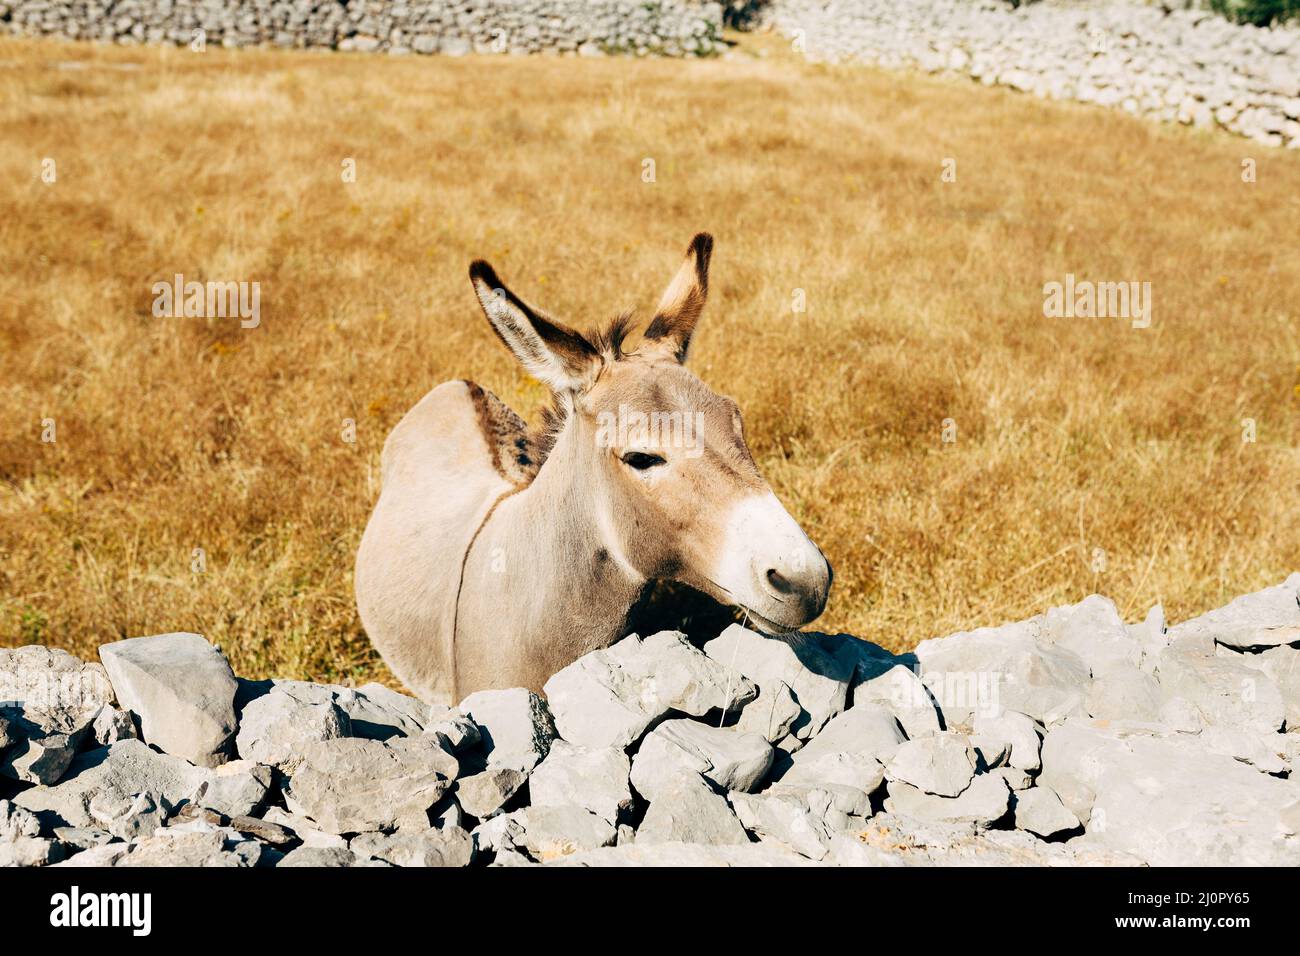 Gray donkey stands near a stone fence in a park Stock Photo